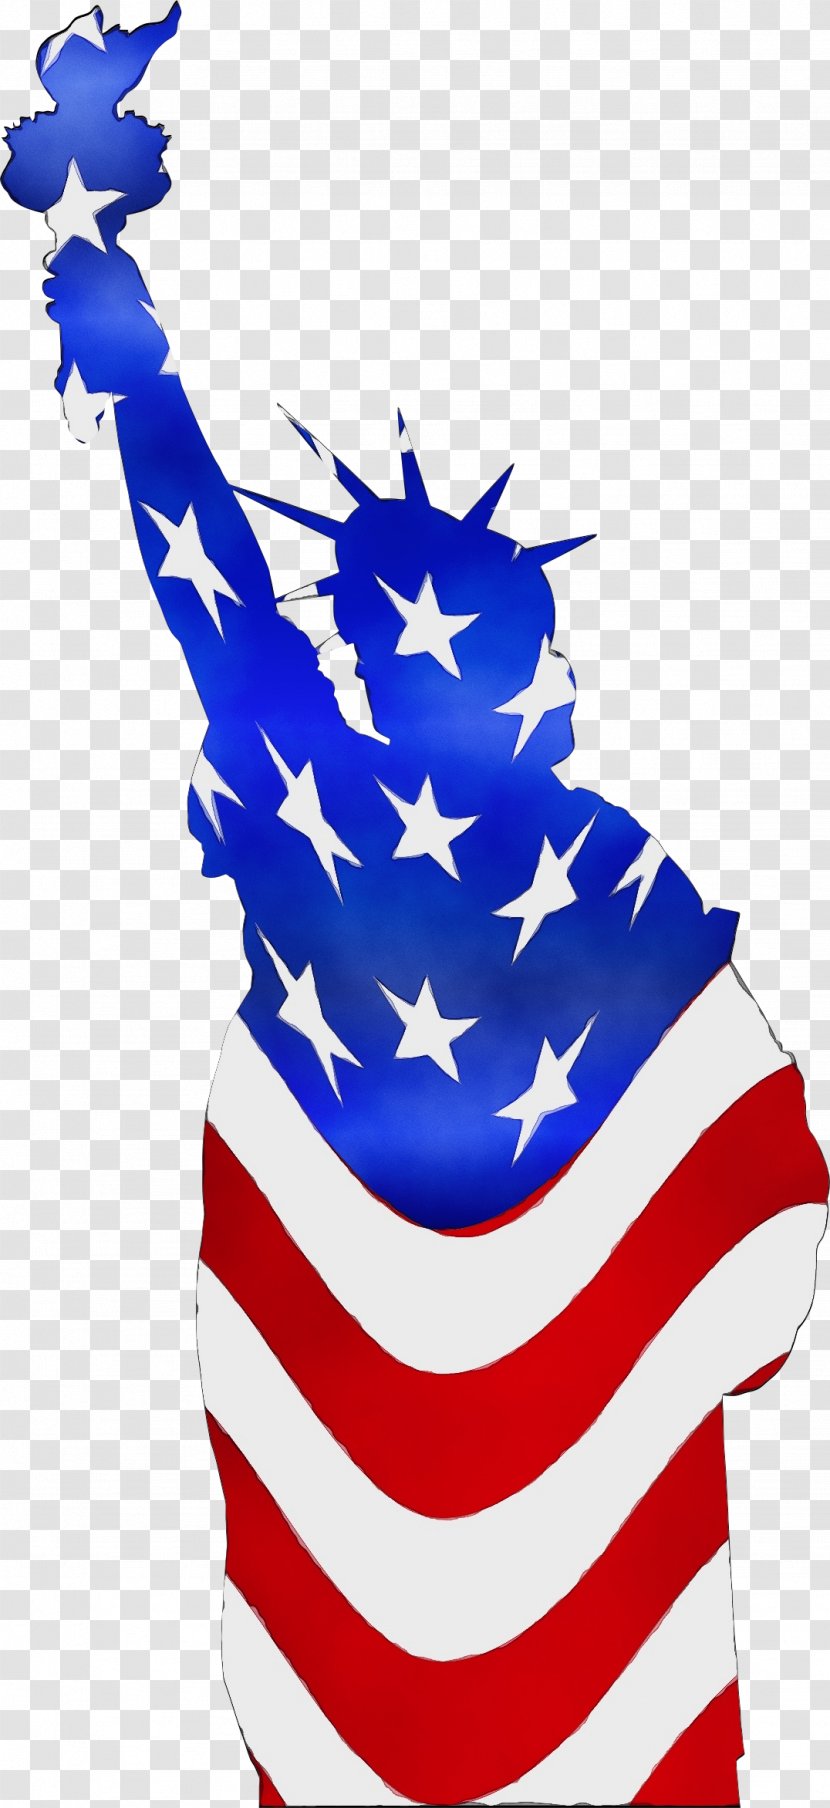 Statue Of Liberty - Star Plant Transparent PNG